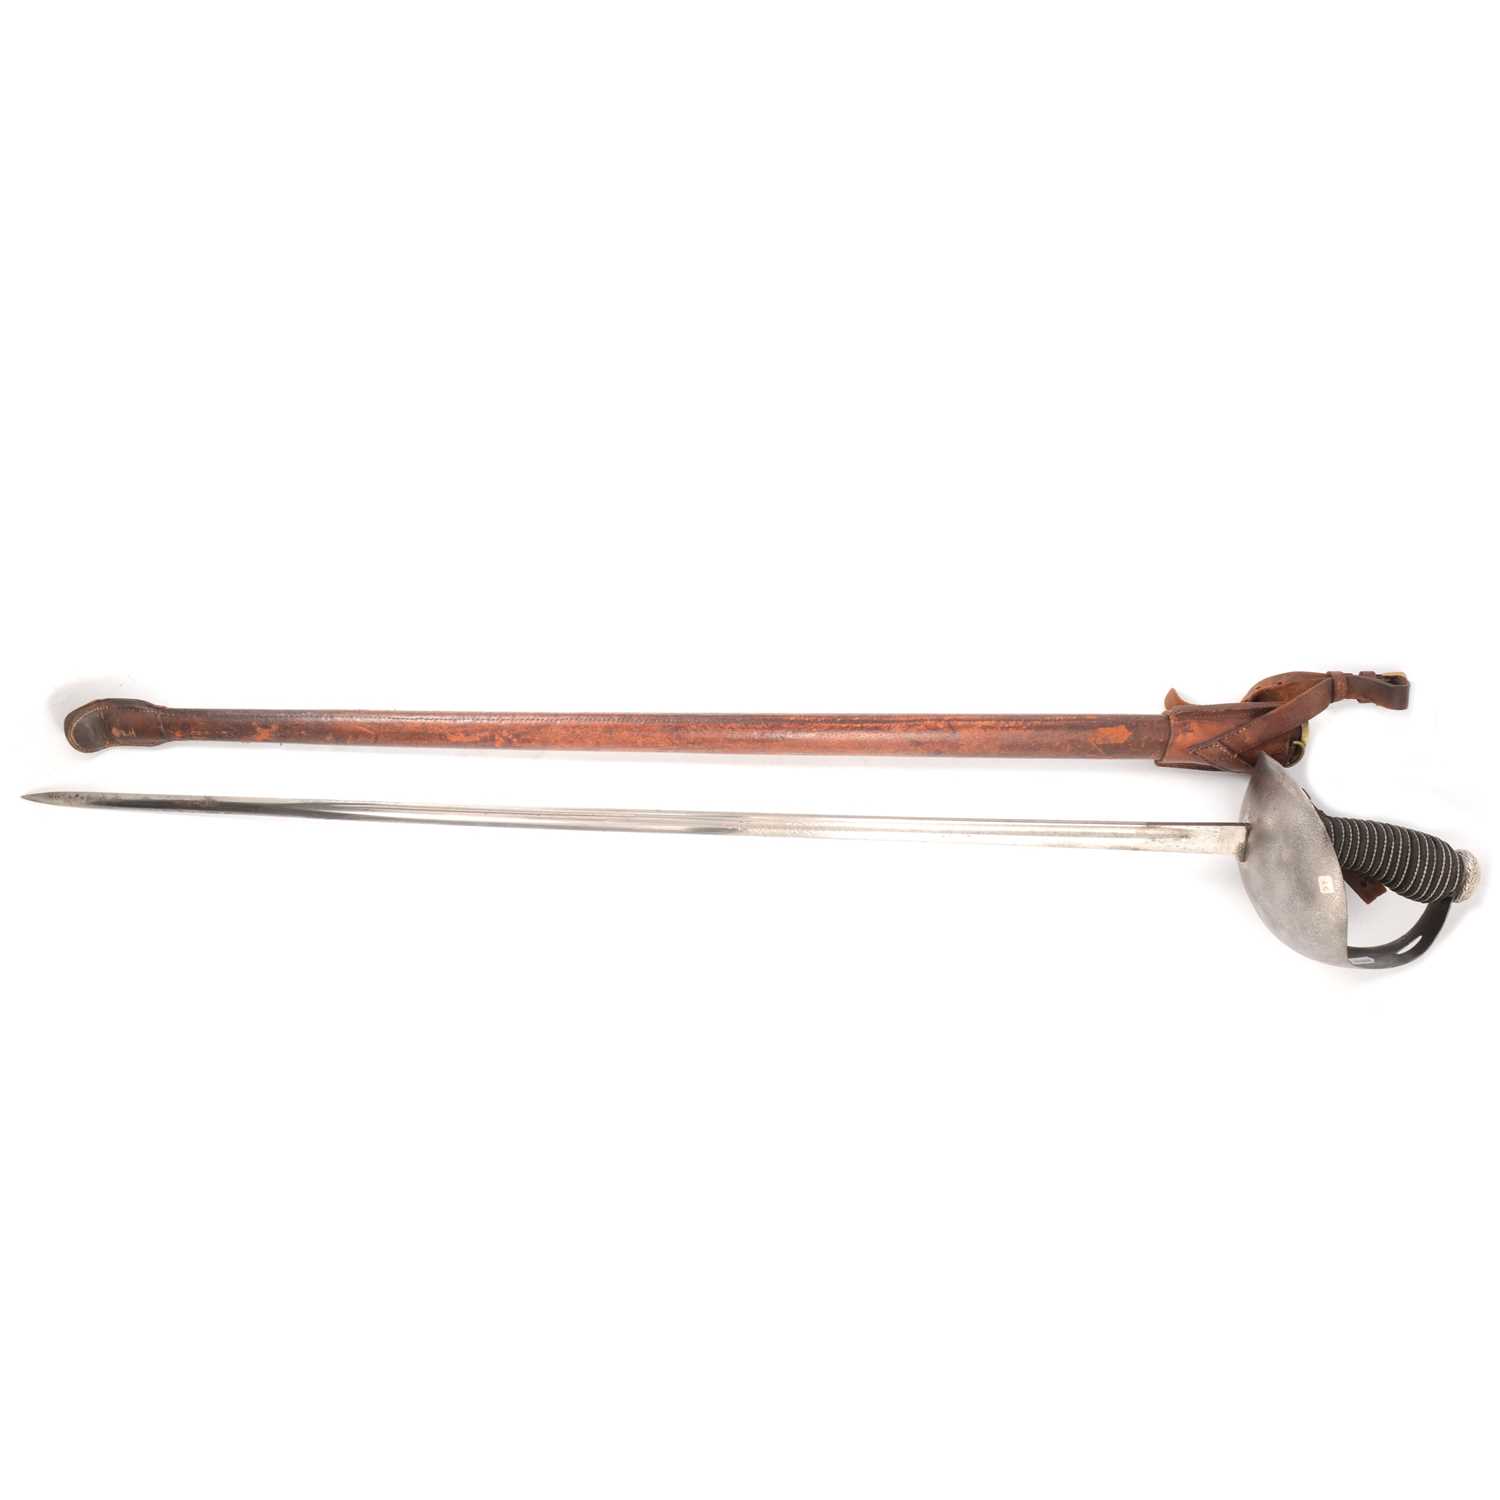 Lot 112 - Cavalry officer's sword, 1912 pattern, in leather scabbard